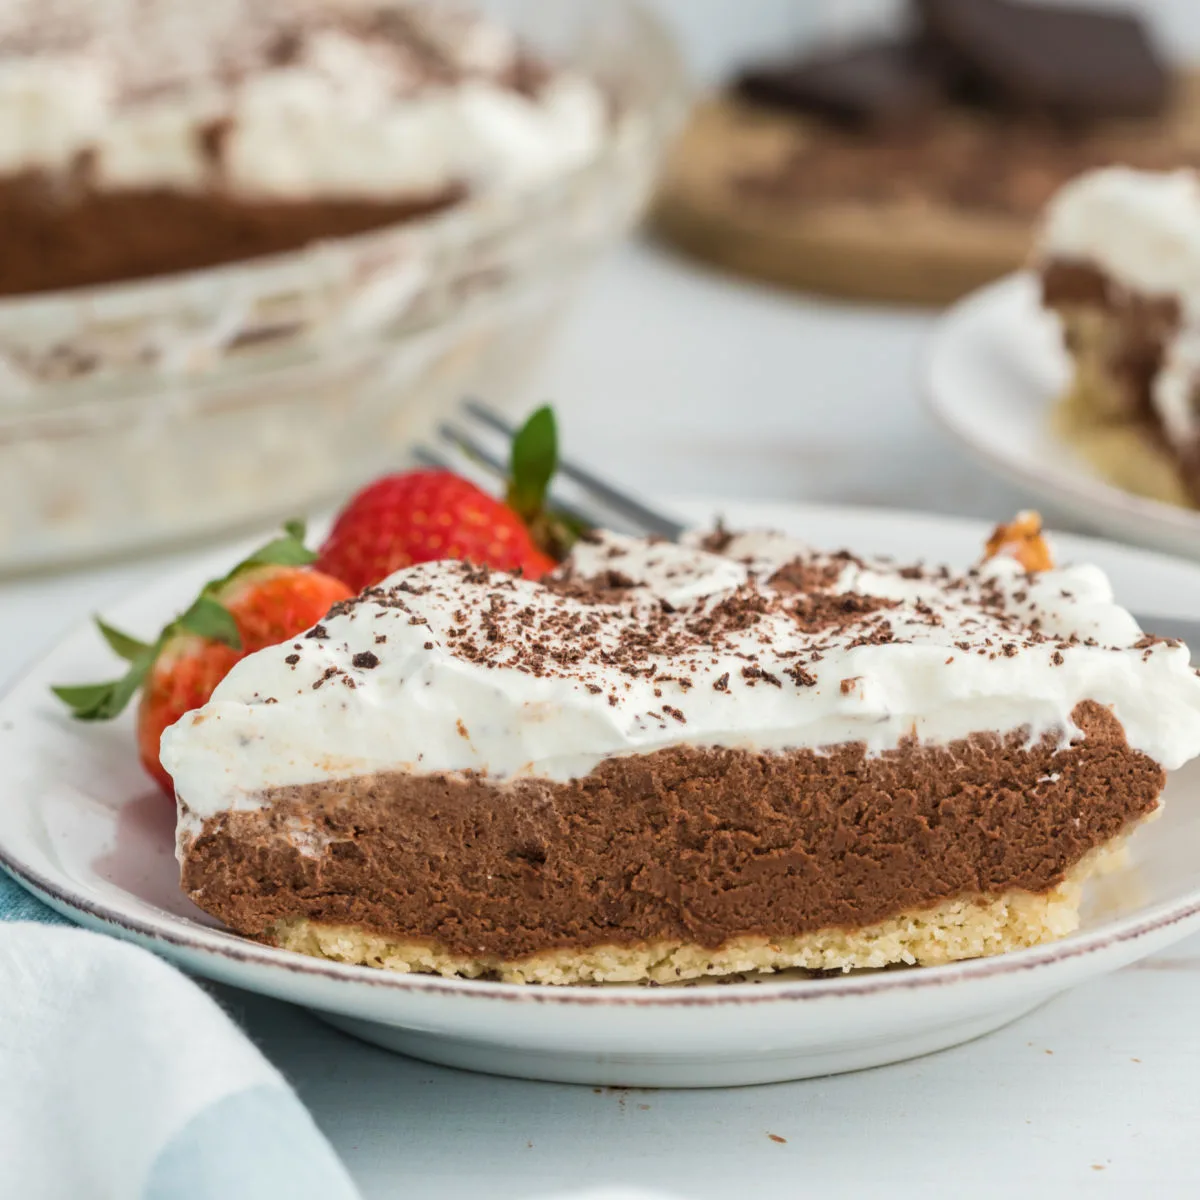 The only thing better than chocolate pudding is Chocolate Pudding Pie! This keto dessert recipe layers sugar free chocolate pudding on a gluten free crust. It's so easy to make with impressive results!